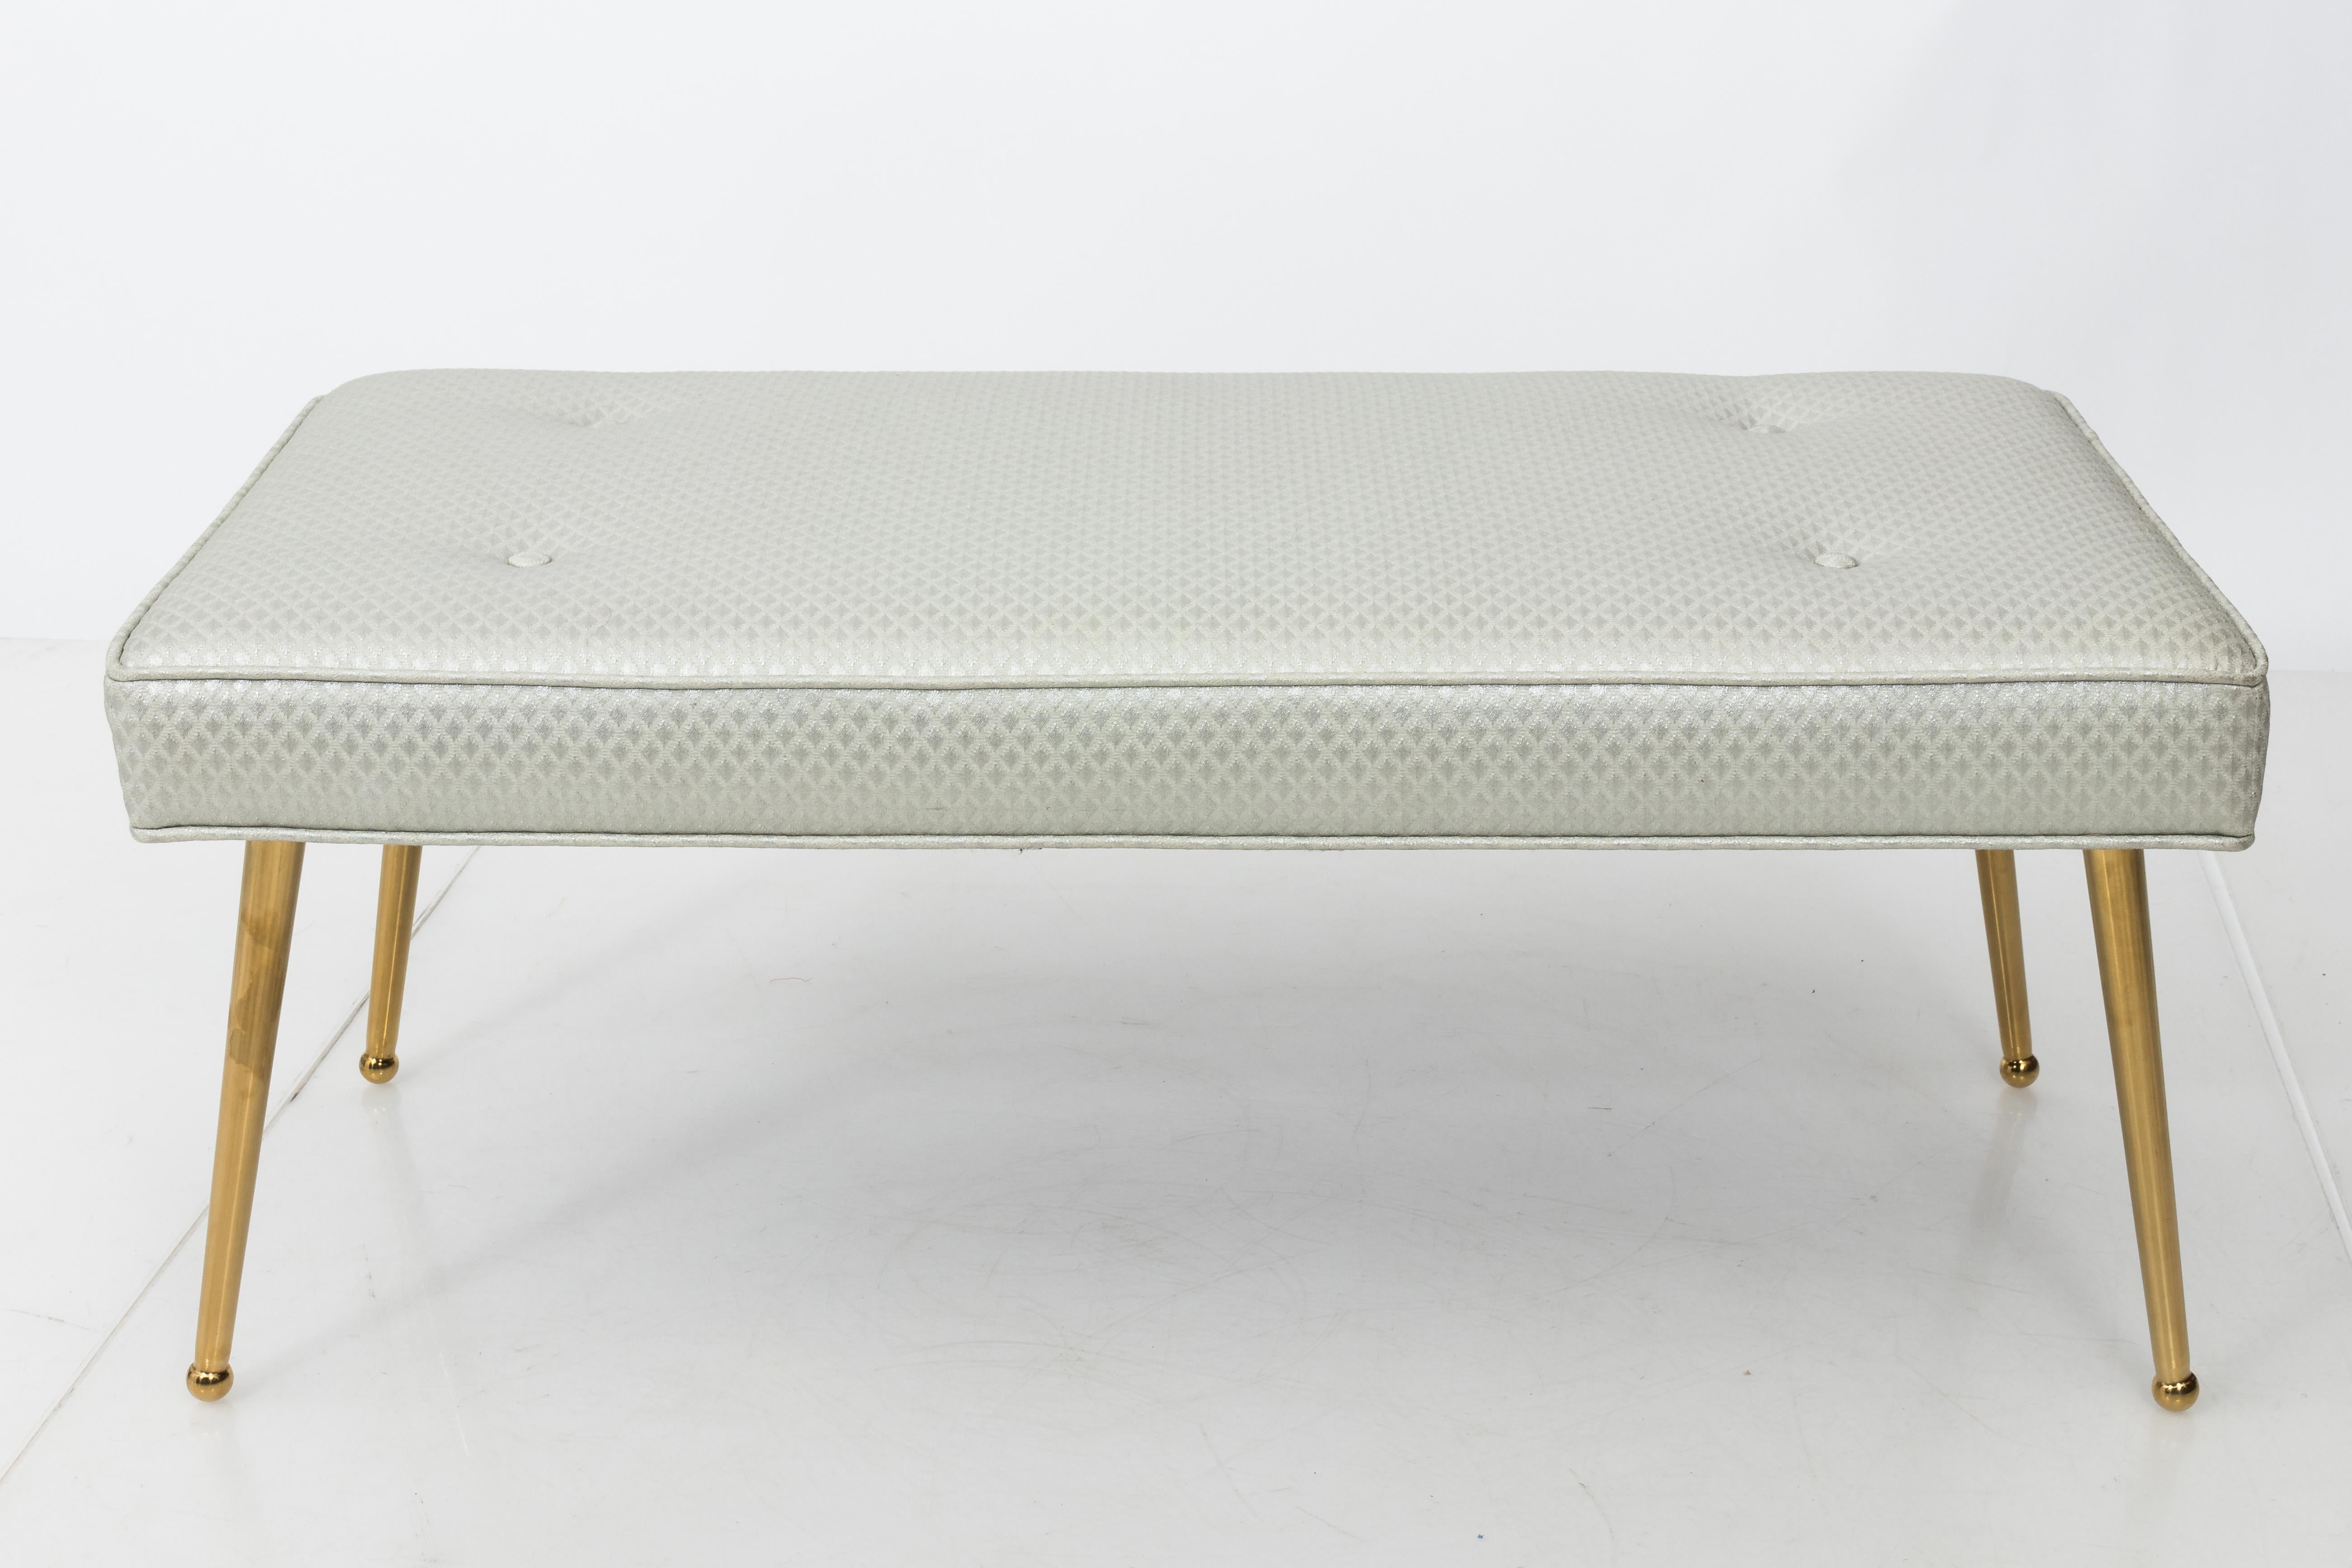 Custom Brass Pointe Leg Bench In Excellent Condition For Sale In New York, NY